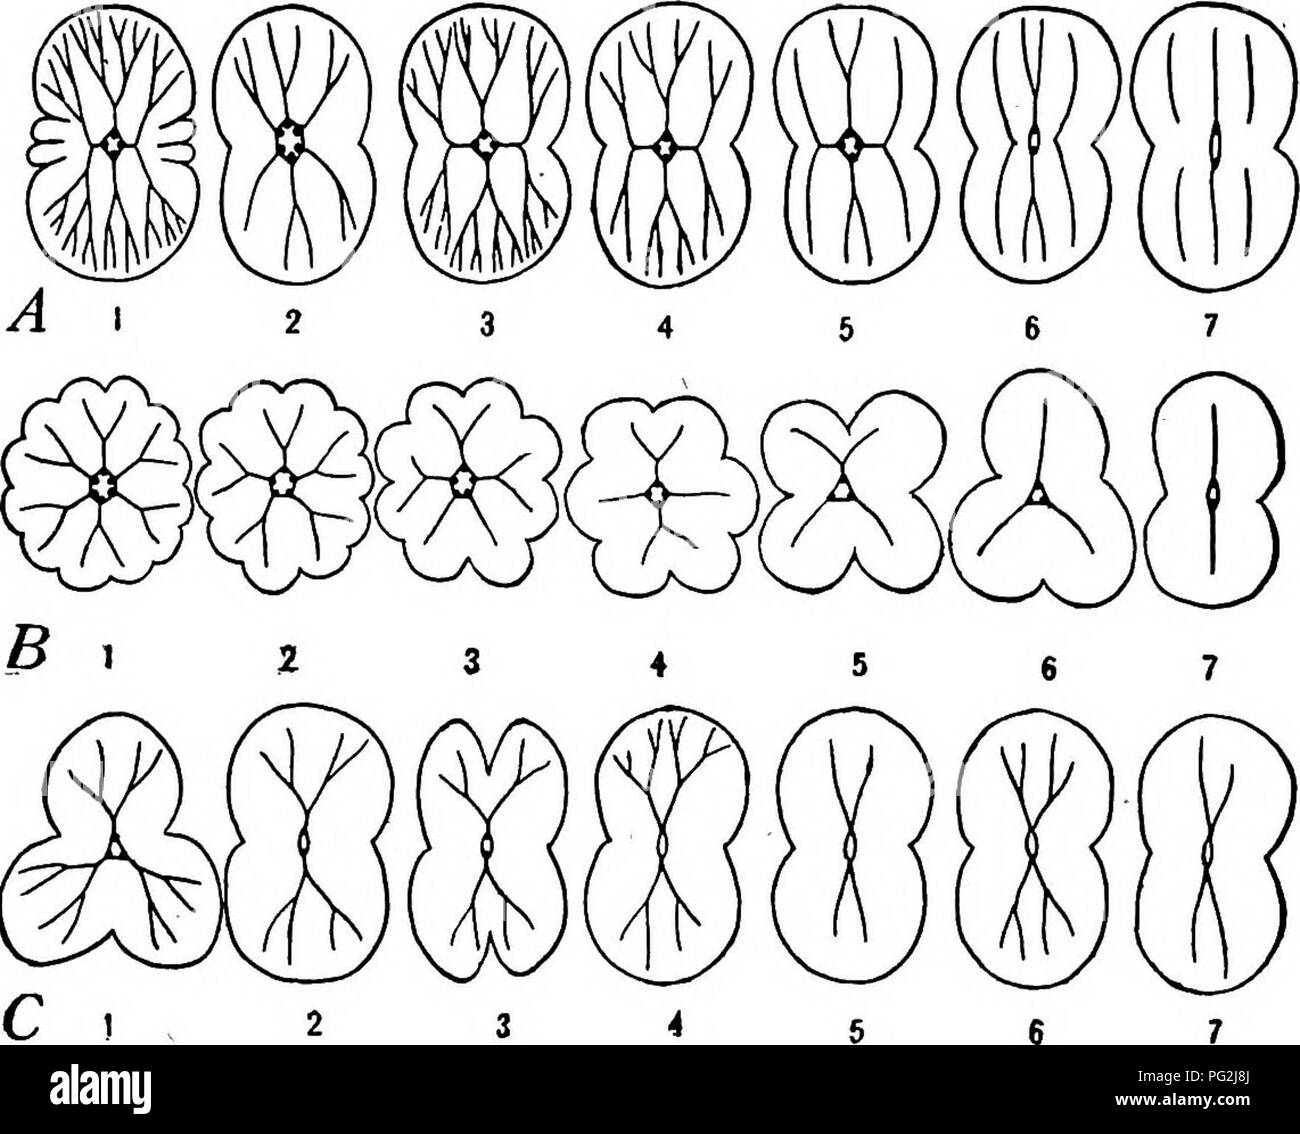 . Morphology of gymnosperms. Gymnosperms; Plant morphology. EVOLUTIONARY TENDENCIES AMONG GYMNOSPERMS 429 Cycadales, the primary root is polyarch. Even Araucaria, which is exceptional in many respects, has been reported with six root poles, although two is the usual number. In the Coniferales the reduction in number of root poles is closely related to the reduction in number. Fig. 462.—Diagrams illustrating the cotyledonary node of gymnosperms and its vascular connections with the cotyledons: the lobes indicate cotyledons.—Prepared by Sister Helen Angela. Series A, Cycadales: I, Dioon spinulos Stock Photo